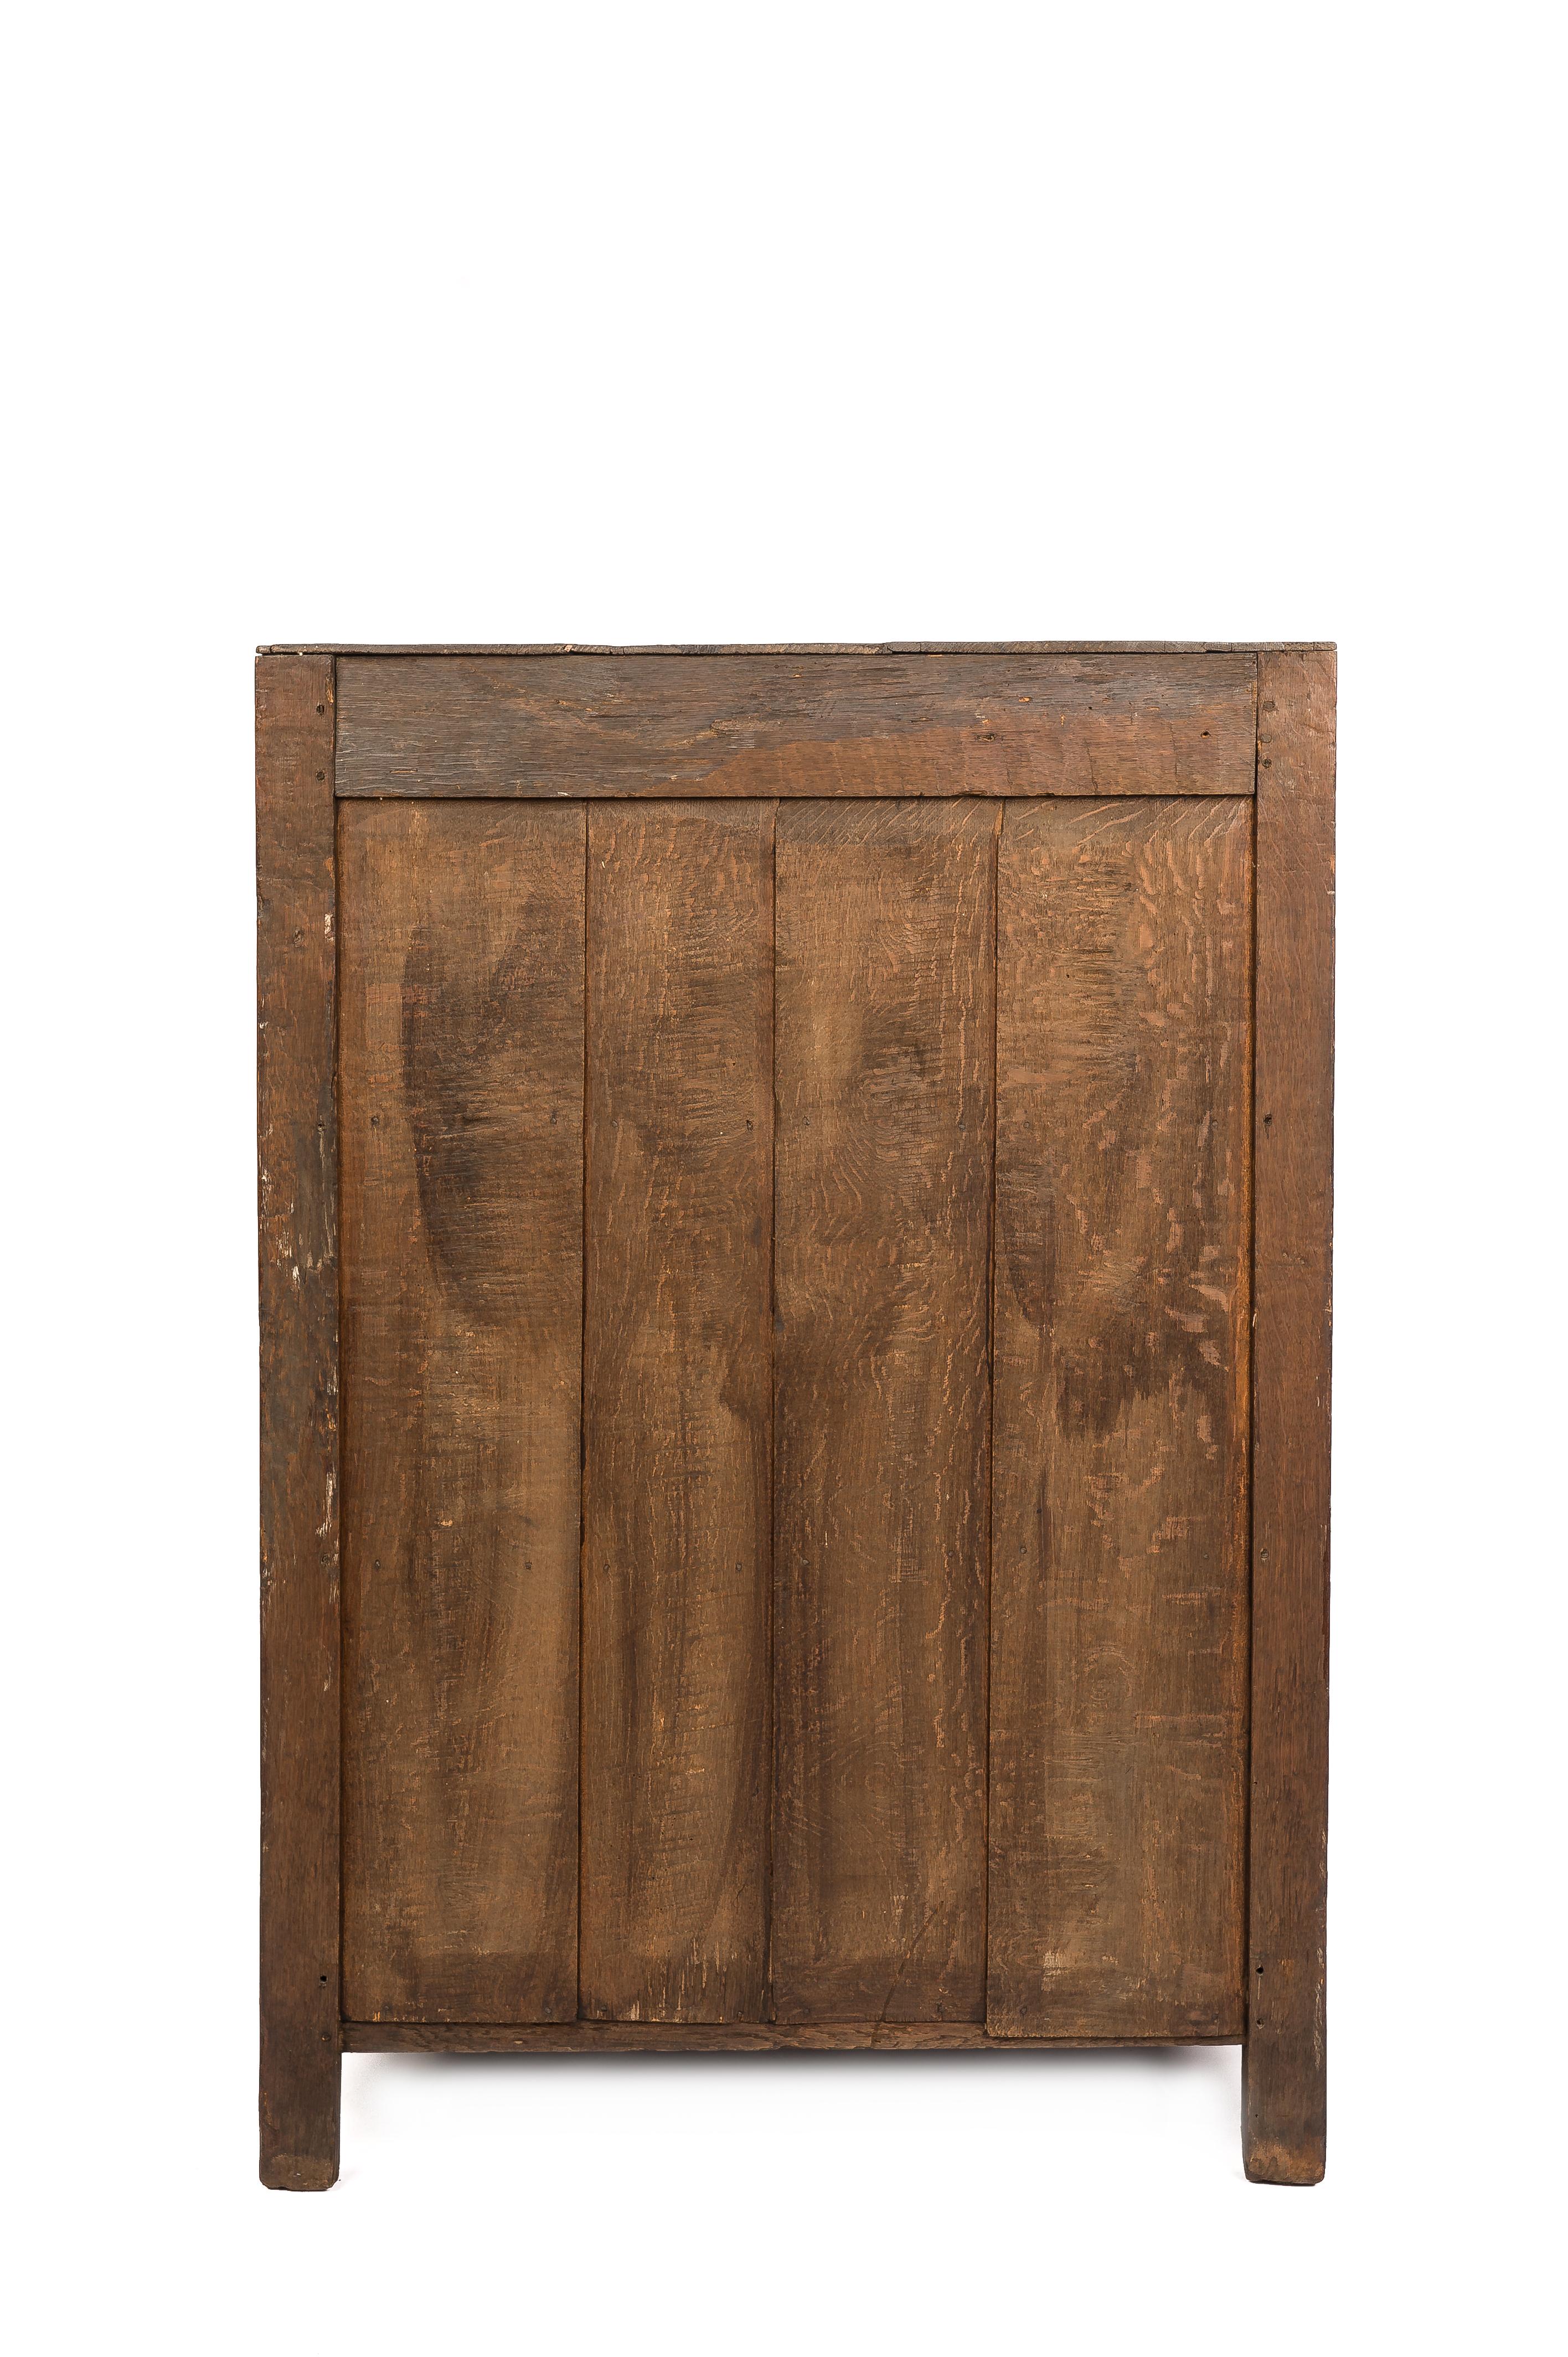 Forged Antique Late 17th Century Dutch Renaissance Single-Door Cabinet in Solid Oak For Sale